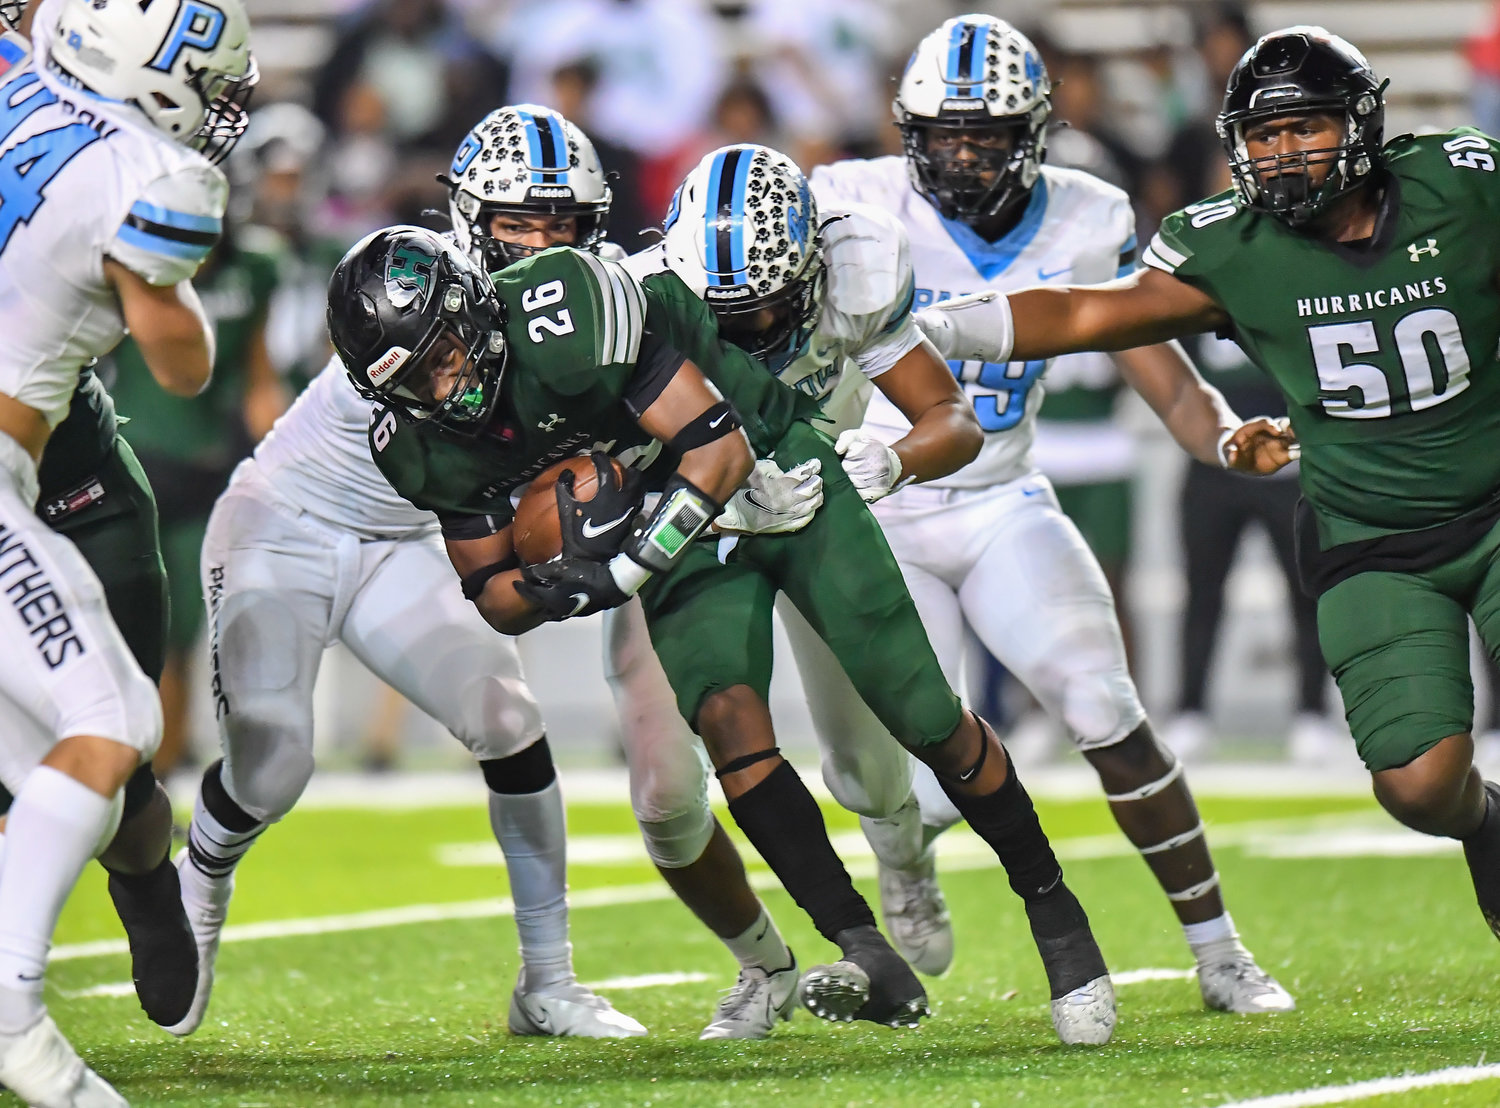 Houston, Tx. Dec 3, 2021: Paetows defense stops Hightowers running game during the quarterfinal playoff game between Paetow and F,B. Hightower at Rice Stadium in Houston. (Photo by Mark Gooman / Katy Times)